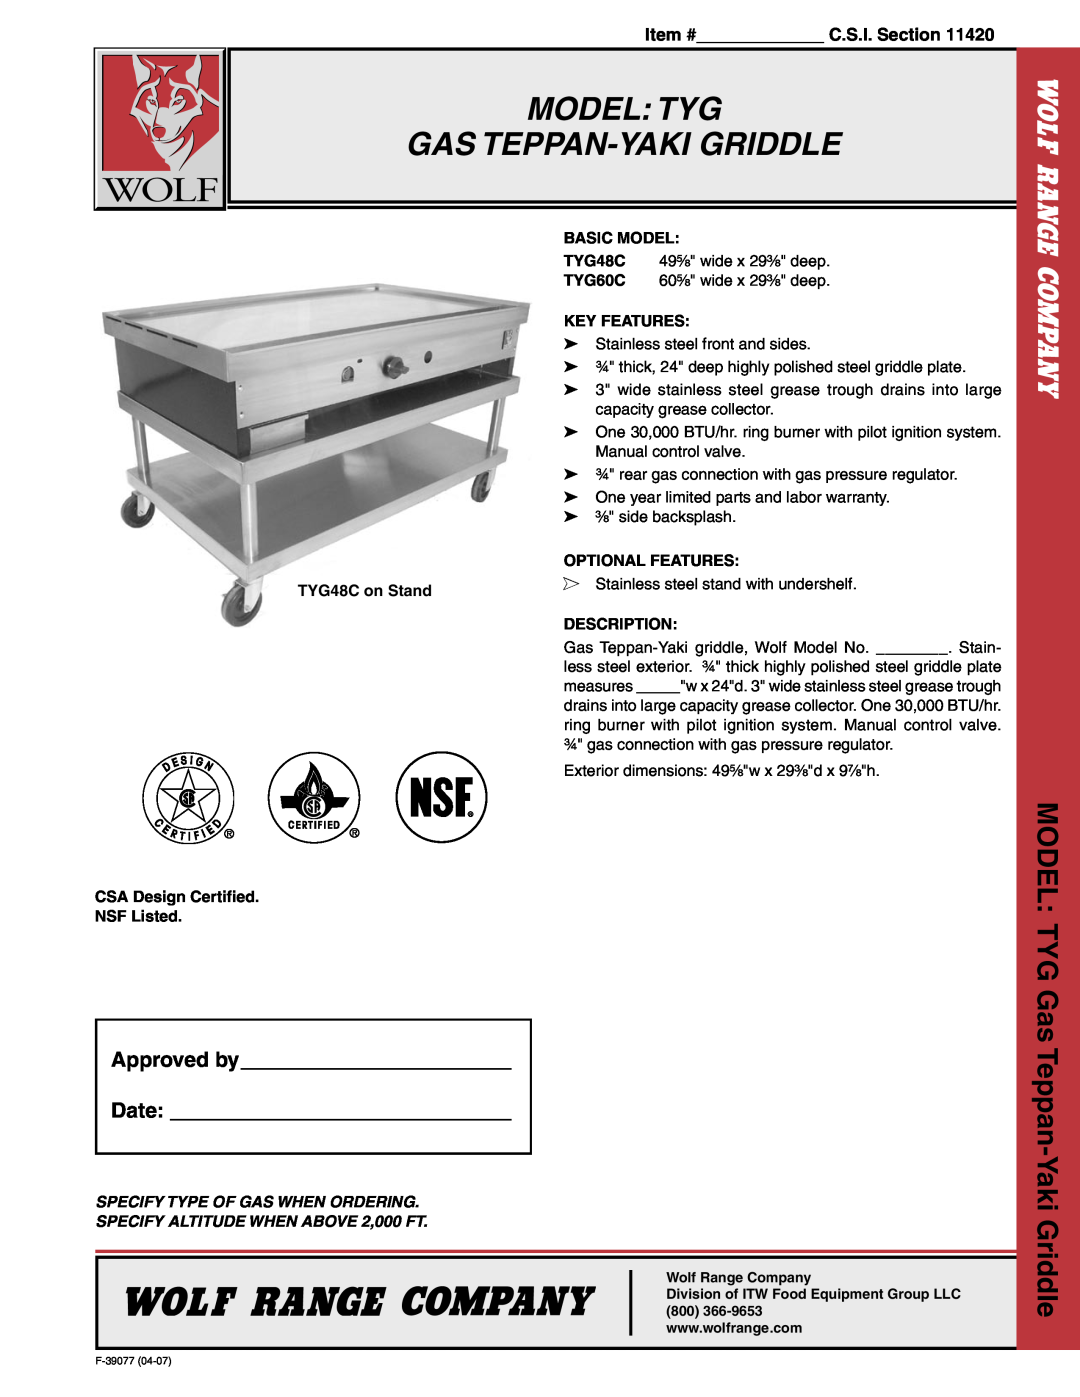 Wolf system manual Model Tyg Gas Teppan-Yaki Griddle, Basic Model, Key Features, Optional Features, TYG48C on Stand 